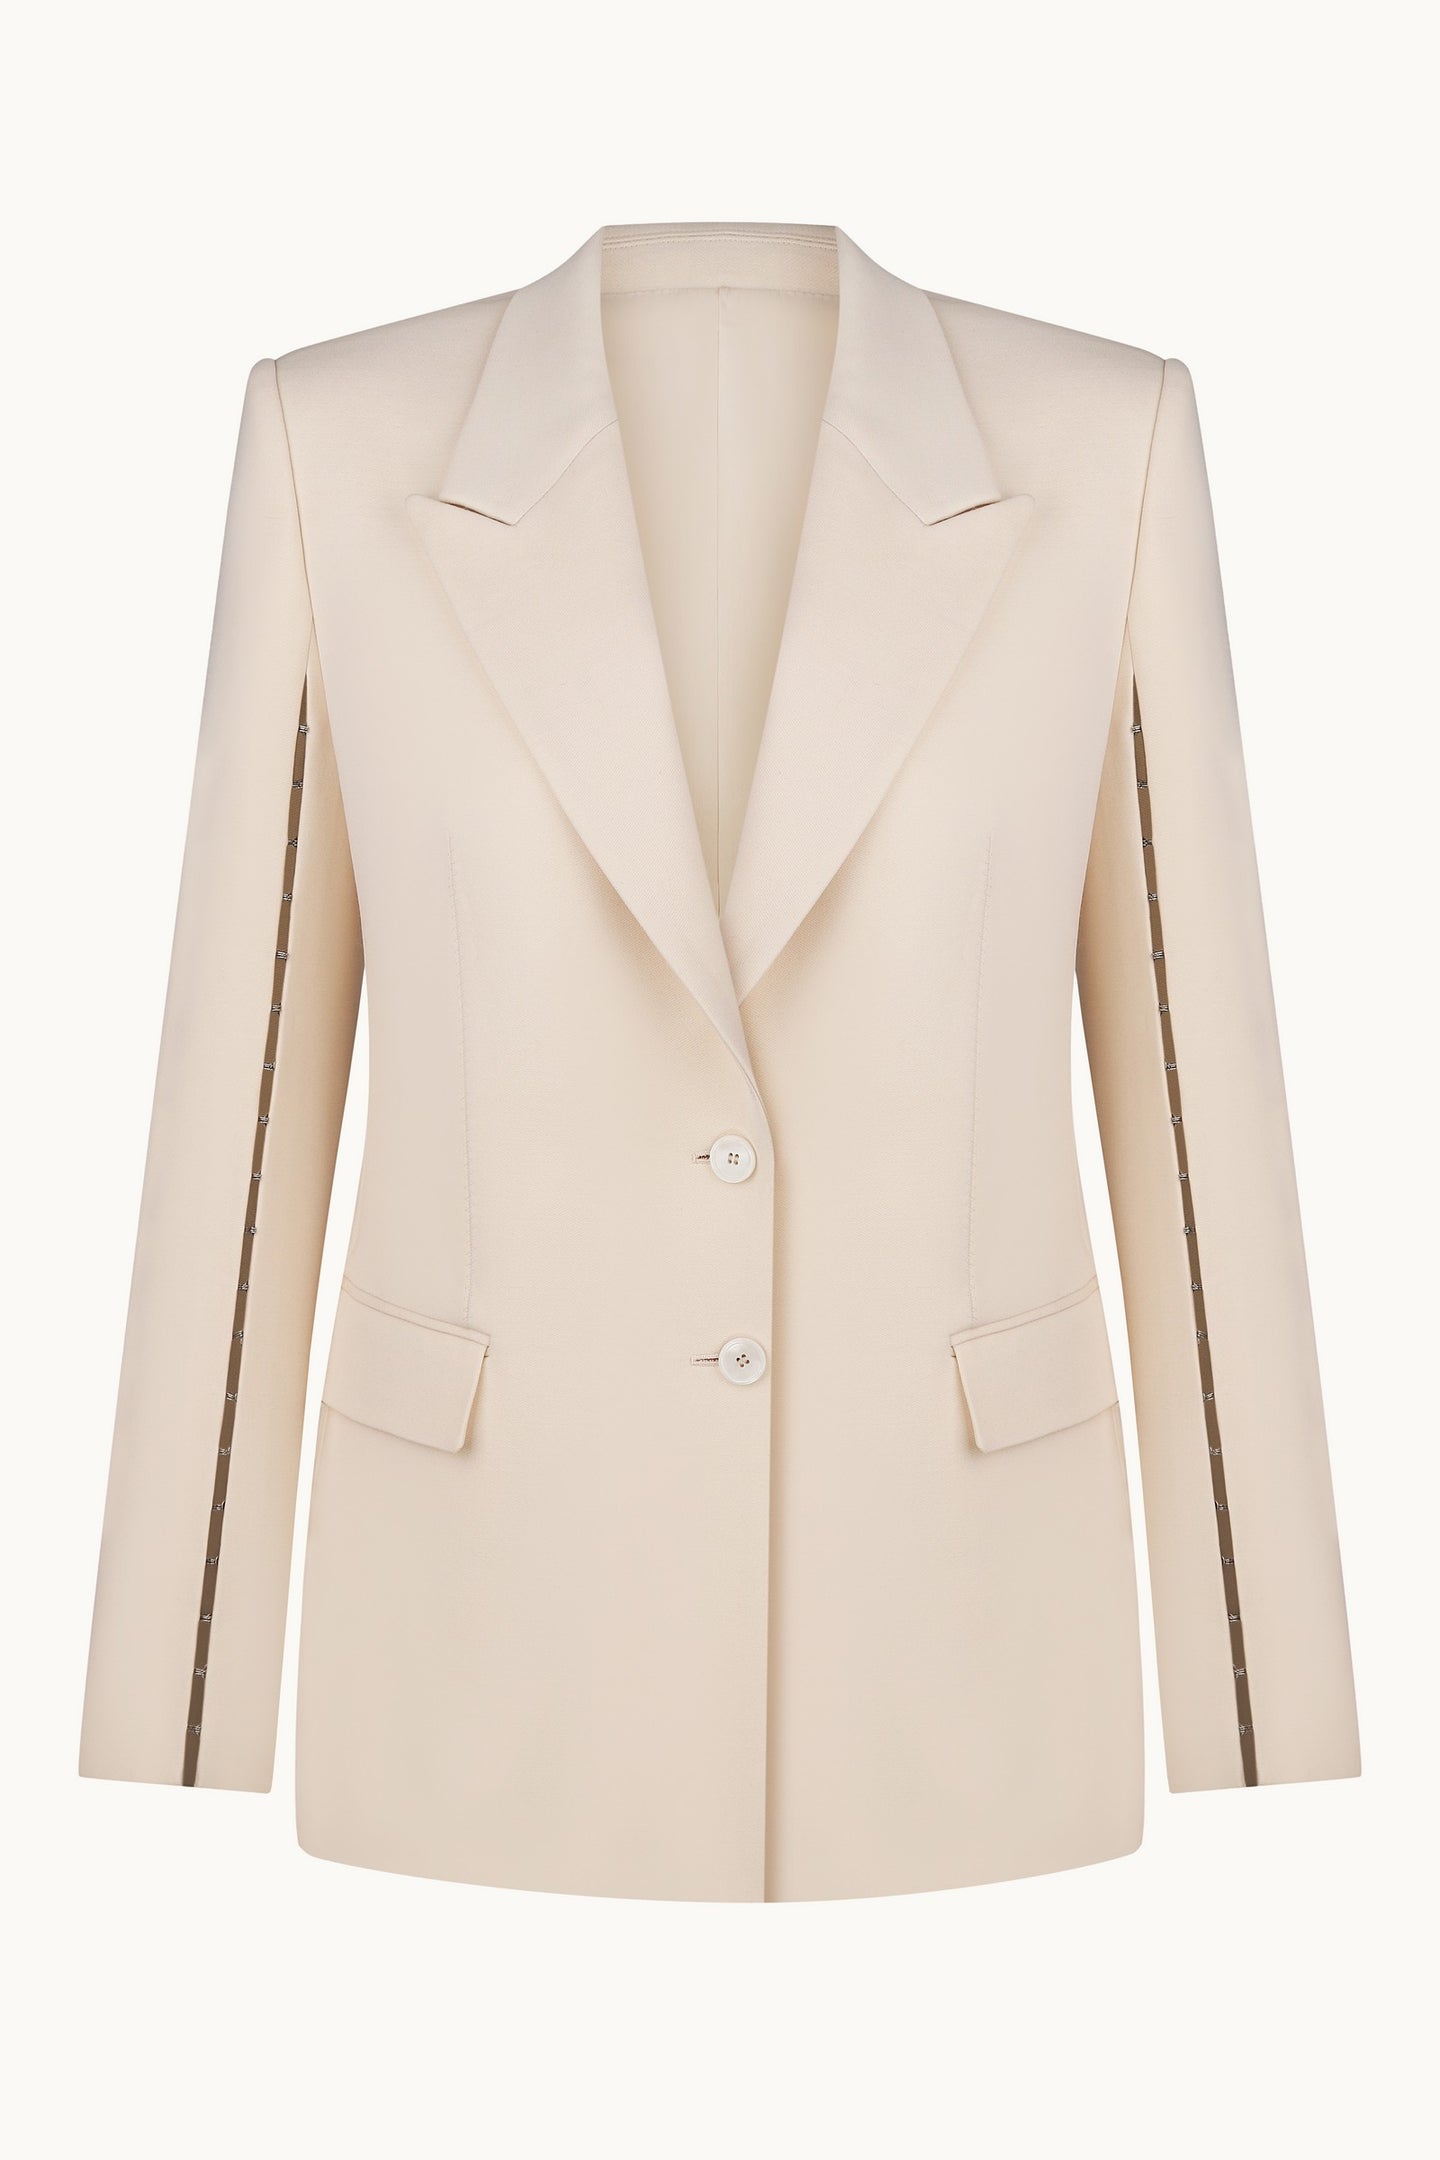 Sydney ivory jacket front view